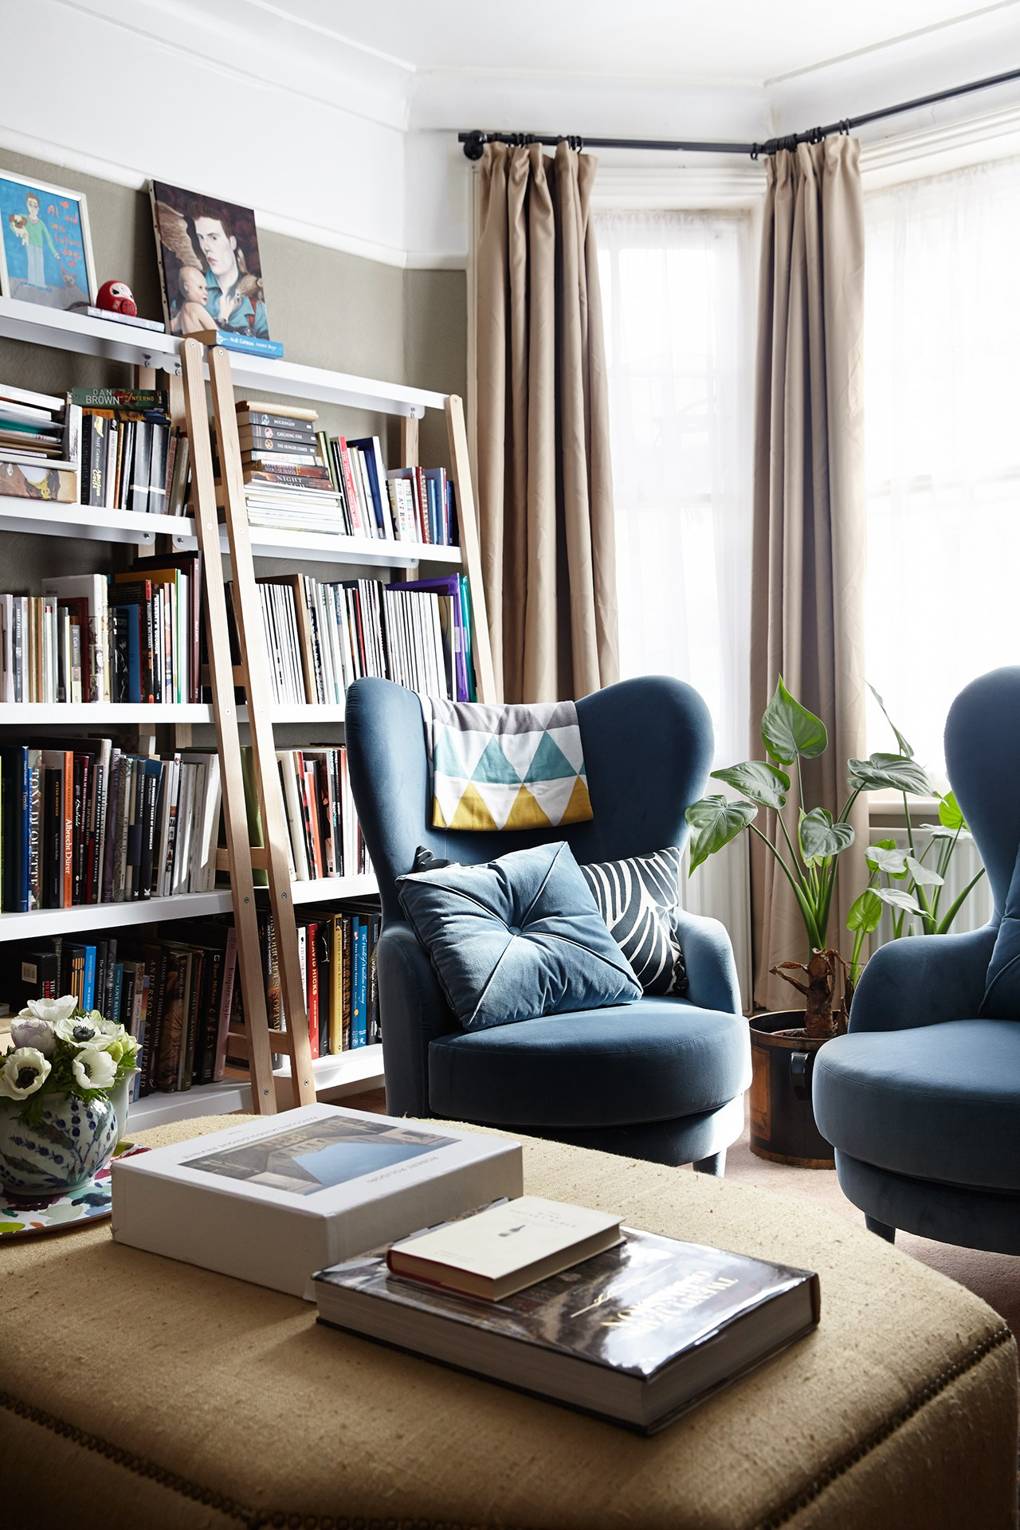 How to decorate the living room of a rental flat | House & Garden